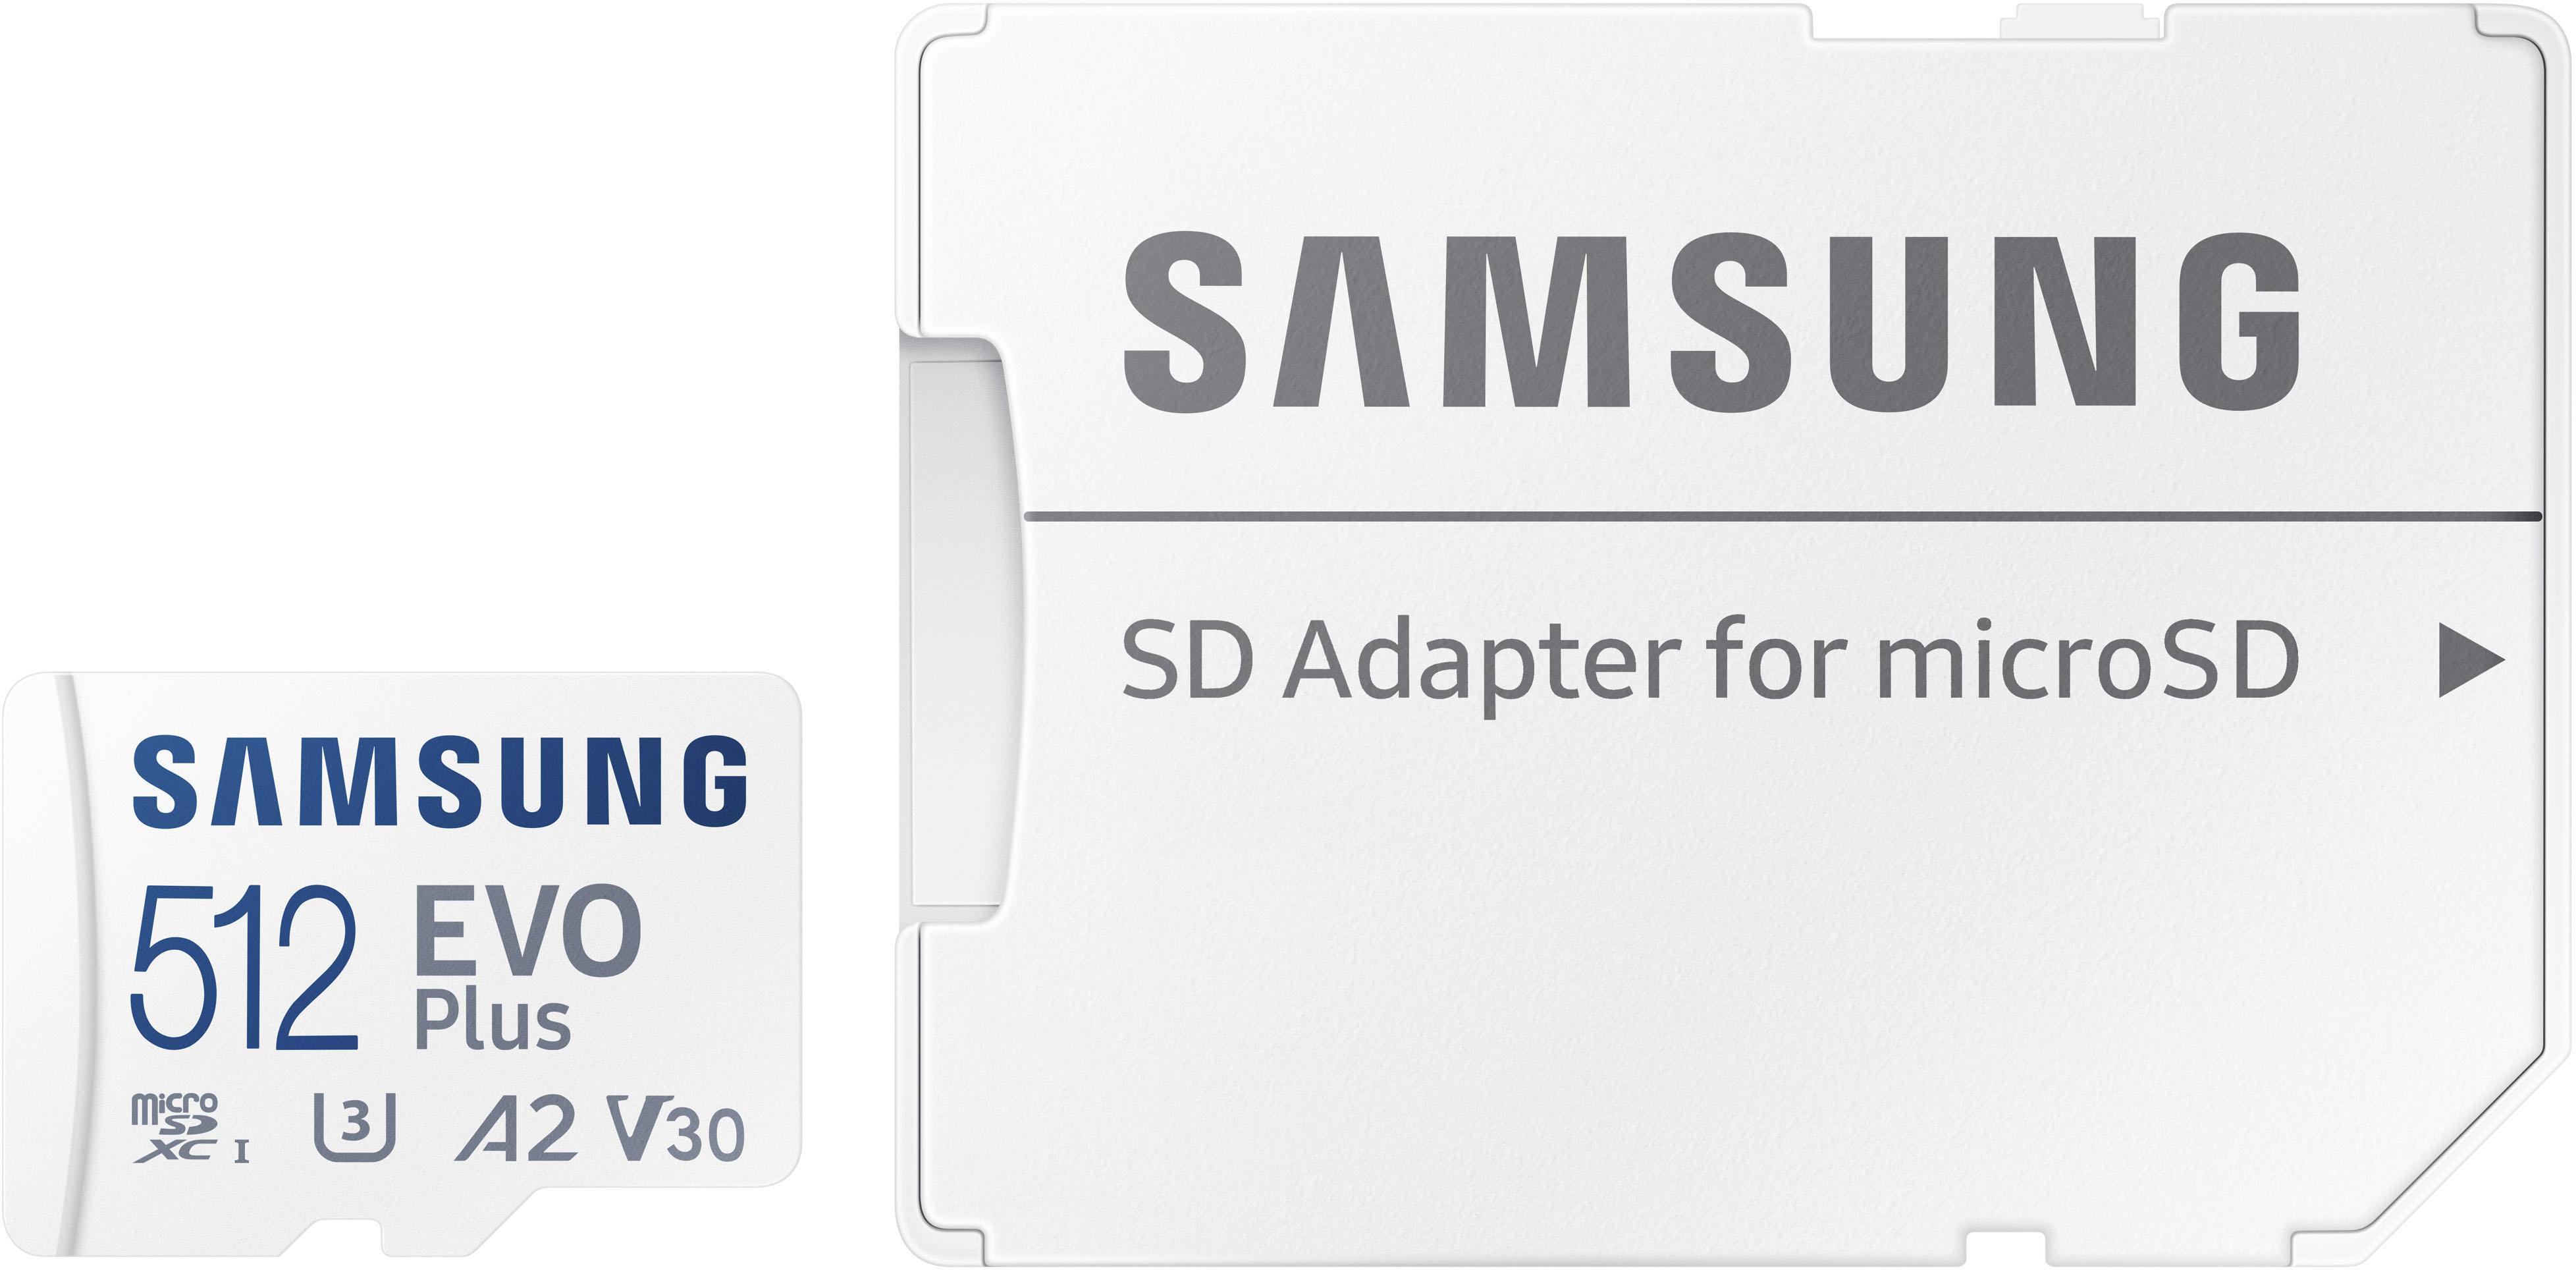 SAMSUNG EVO Plus w/ SD Adaptor 512GB Micro SDXC, Up-to 130MB/s, Expanded  Storage for Gaming Devices, Android Tablets and Smart Phones, Memory Card